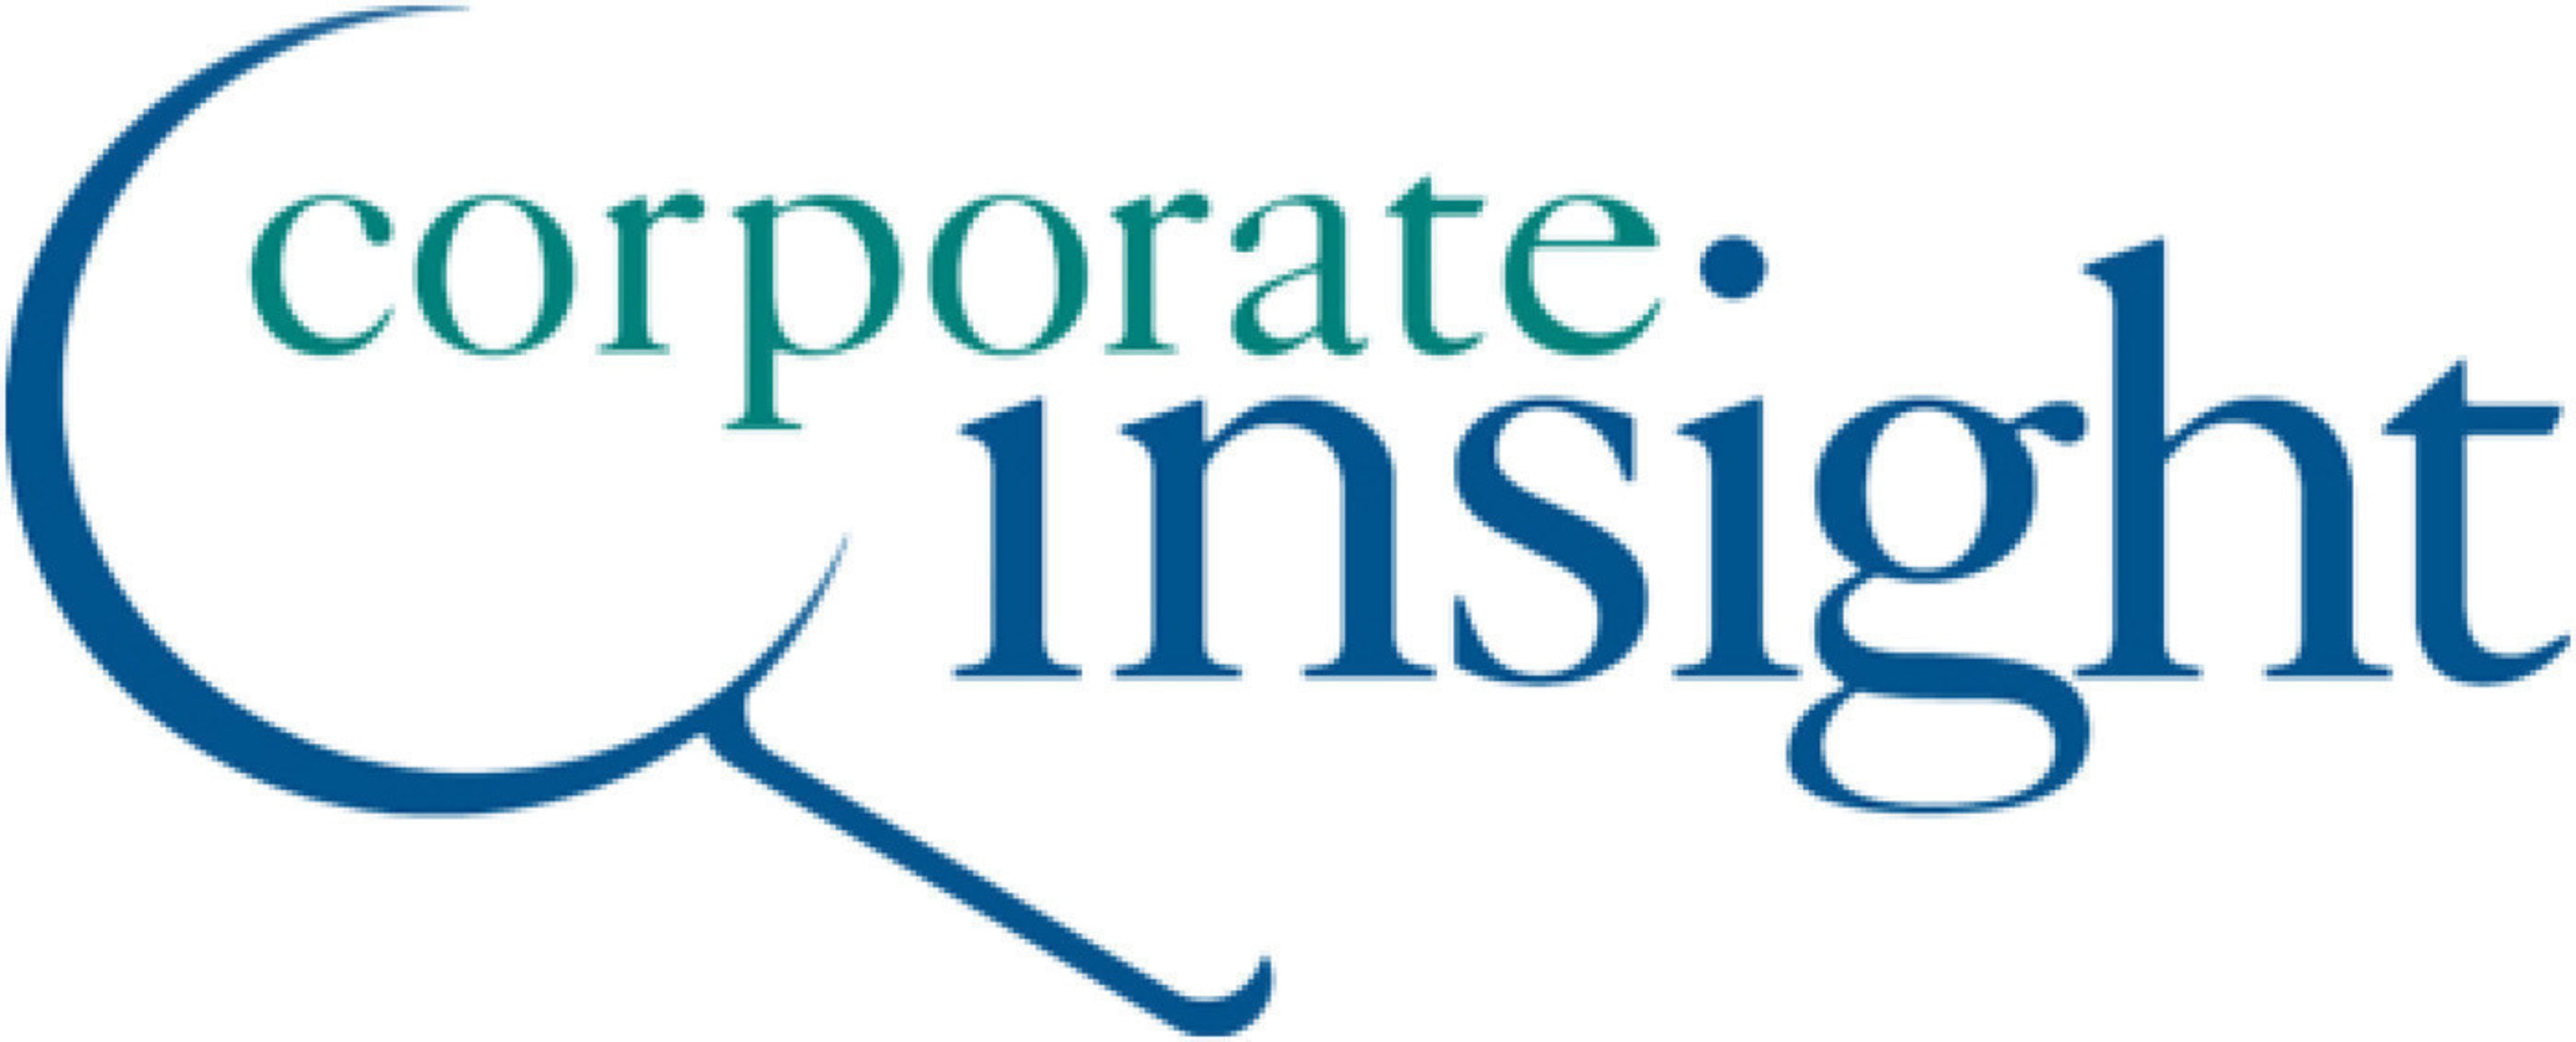 Corporate Insight provides competitive intelligence, consulting and user experience (UX) research to the nation’s leading insurers, financial services firms and educational institutions. For more than two decades, the firm has published customer experience-focused research and has advised clients on key competitive issues with a focus on helping them improve their digital capabilities. The firm offers subscription-based Monitor Services in 14 verticals, including brokerage, healthcare and alumni relations, along with custom research and consulting services, digital capabilities audits, special studies and UX research. To learn more, visit http://corporateinsight.com/about-us/what-we-do/corporateinsight.com. Connect with us on Facebook, Twitter and LinkedIn.